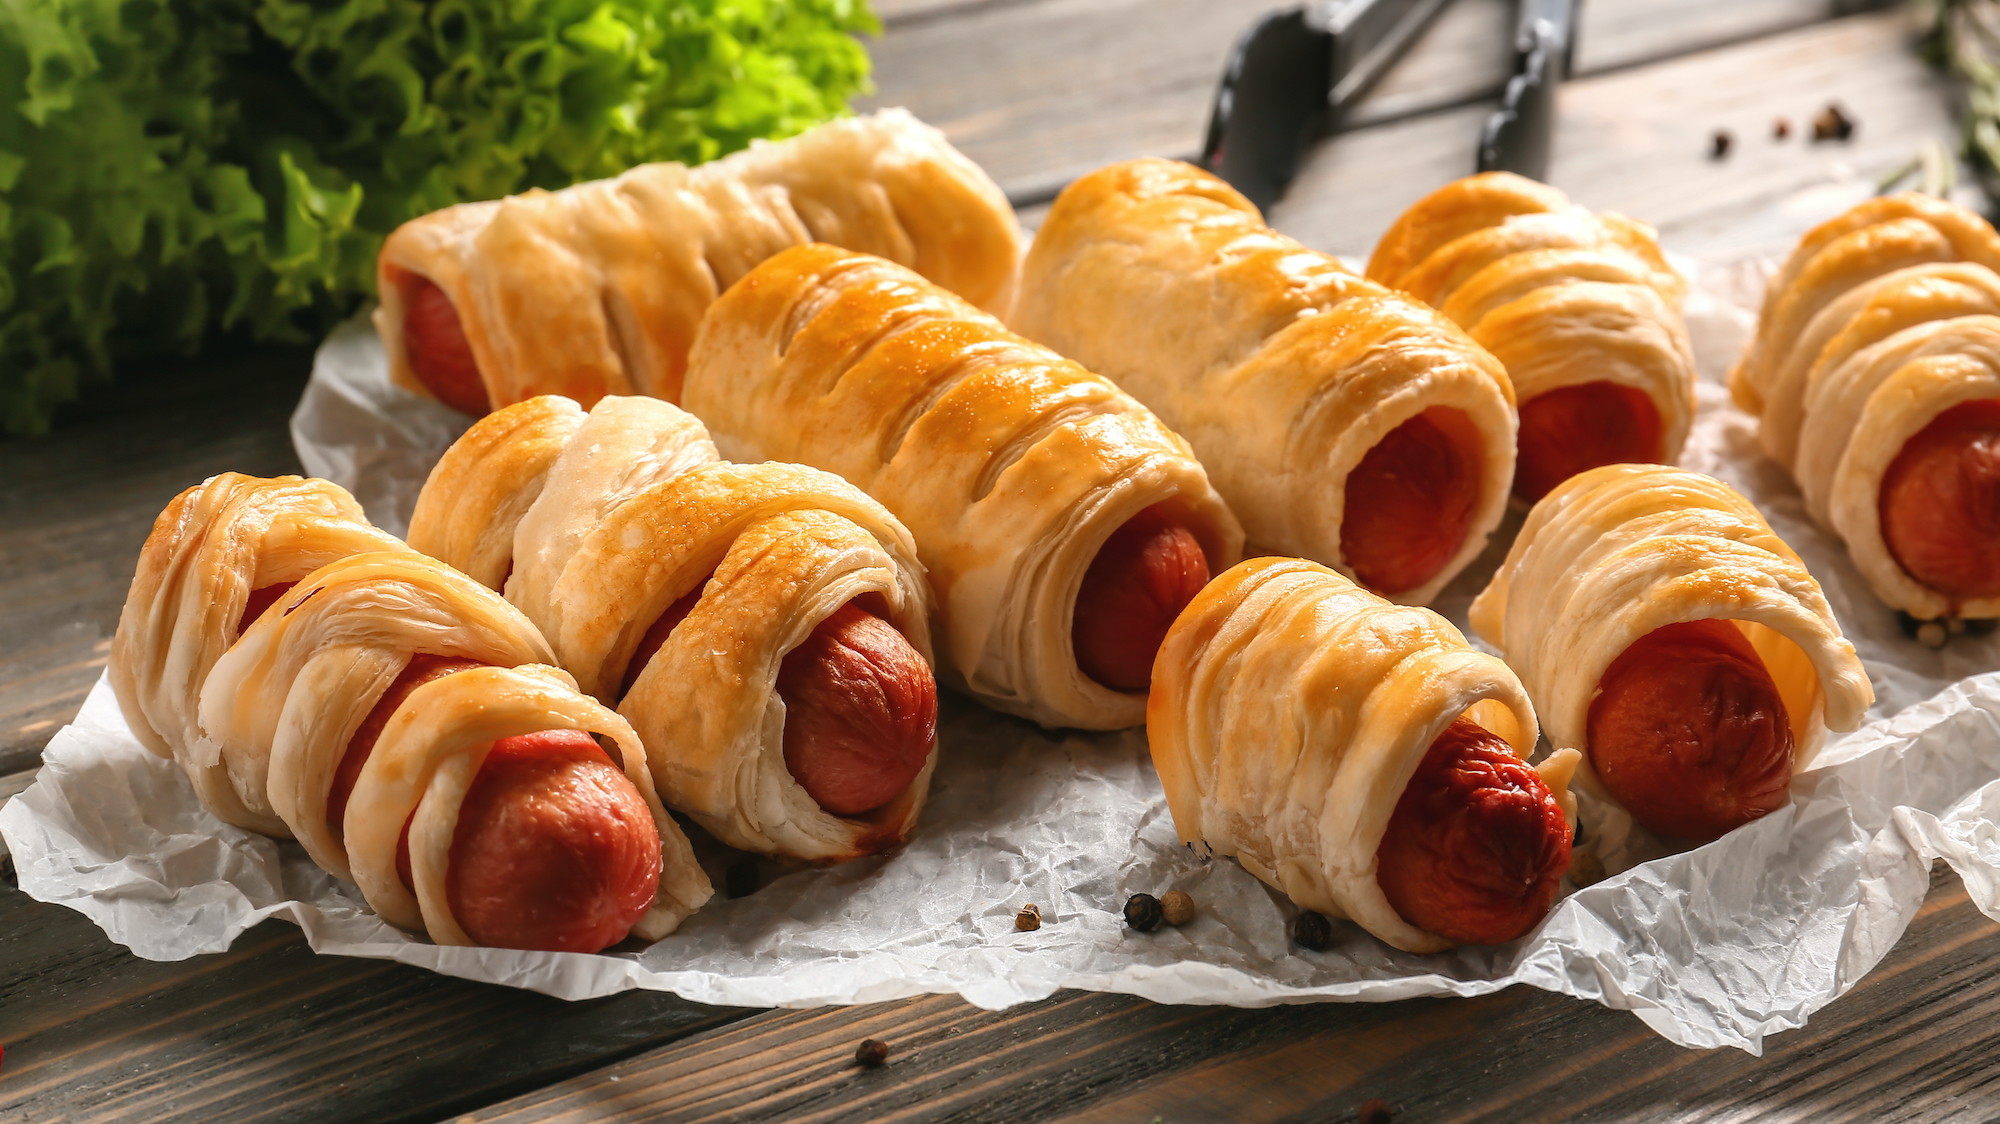 Super bowl air fryer recipes - pigs in a blanket